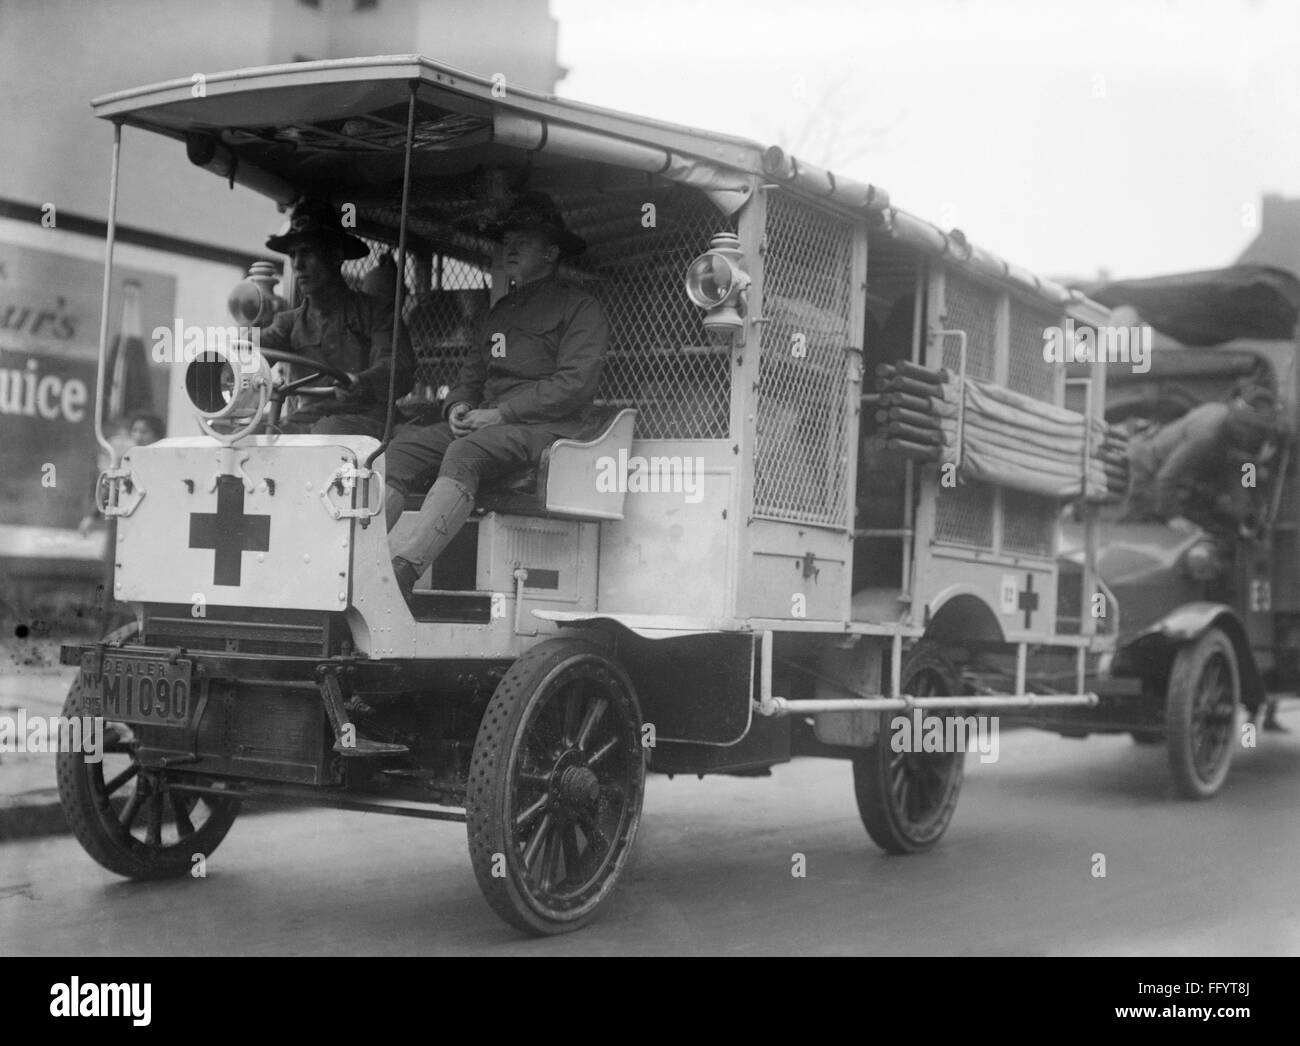 PHOTOGRAPH.1916 STRAKER SQUIRE HENDON RED CROSS AMBULANCE 